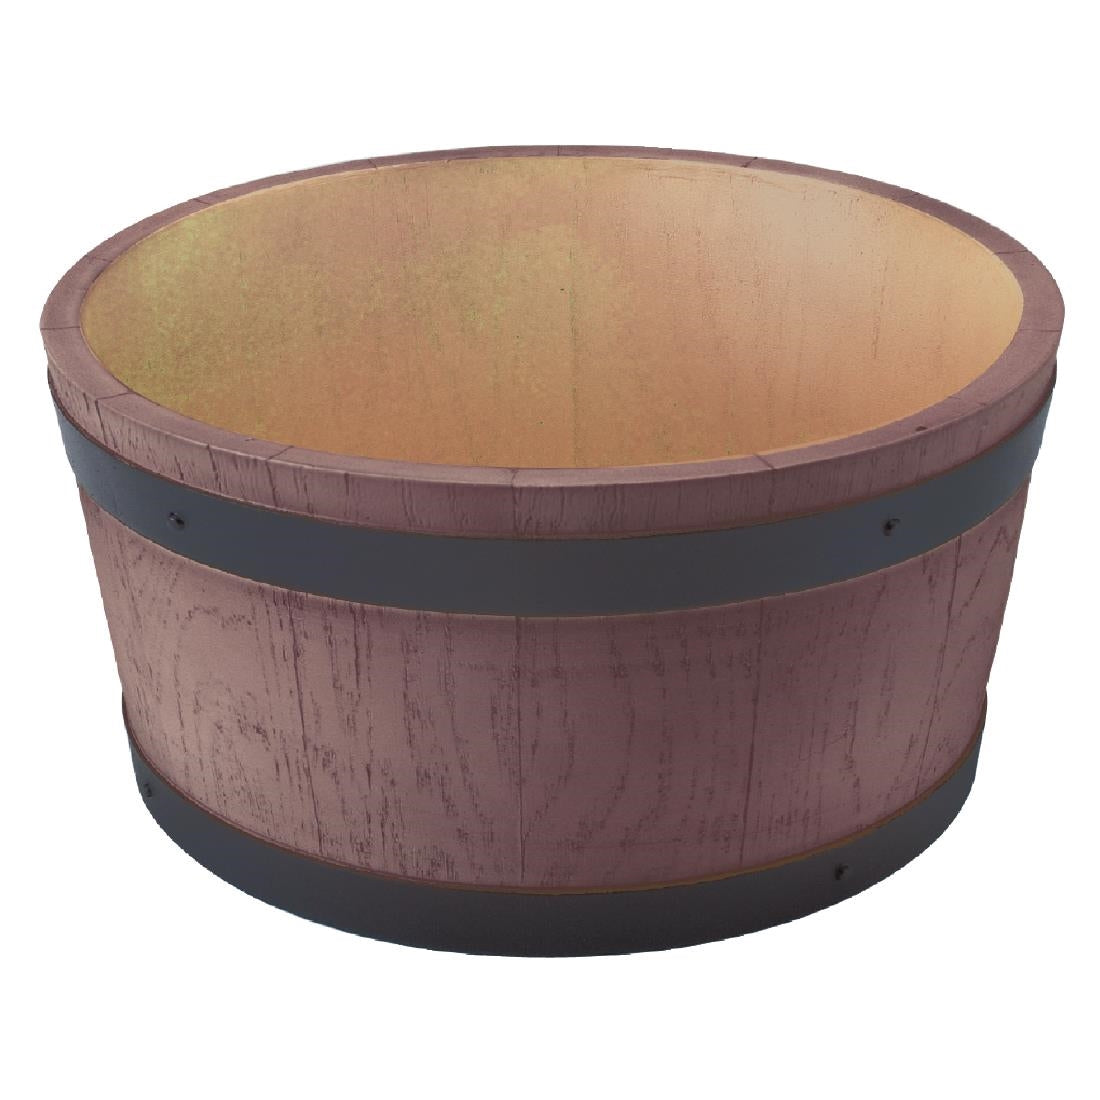 CK712 Beaumont Barrel End Wine And Champagne Bucket